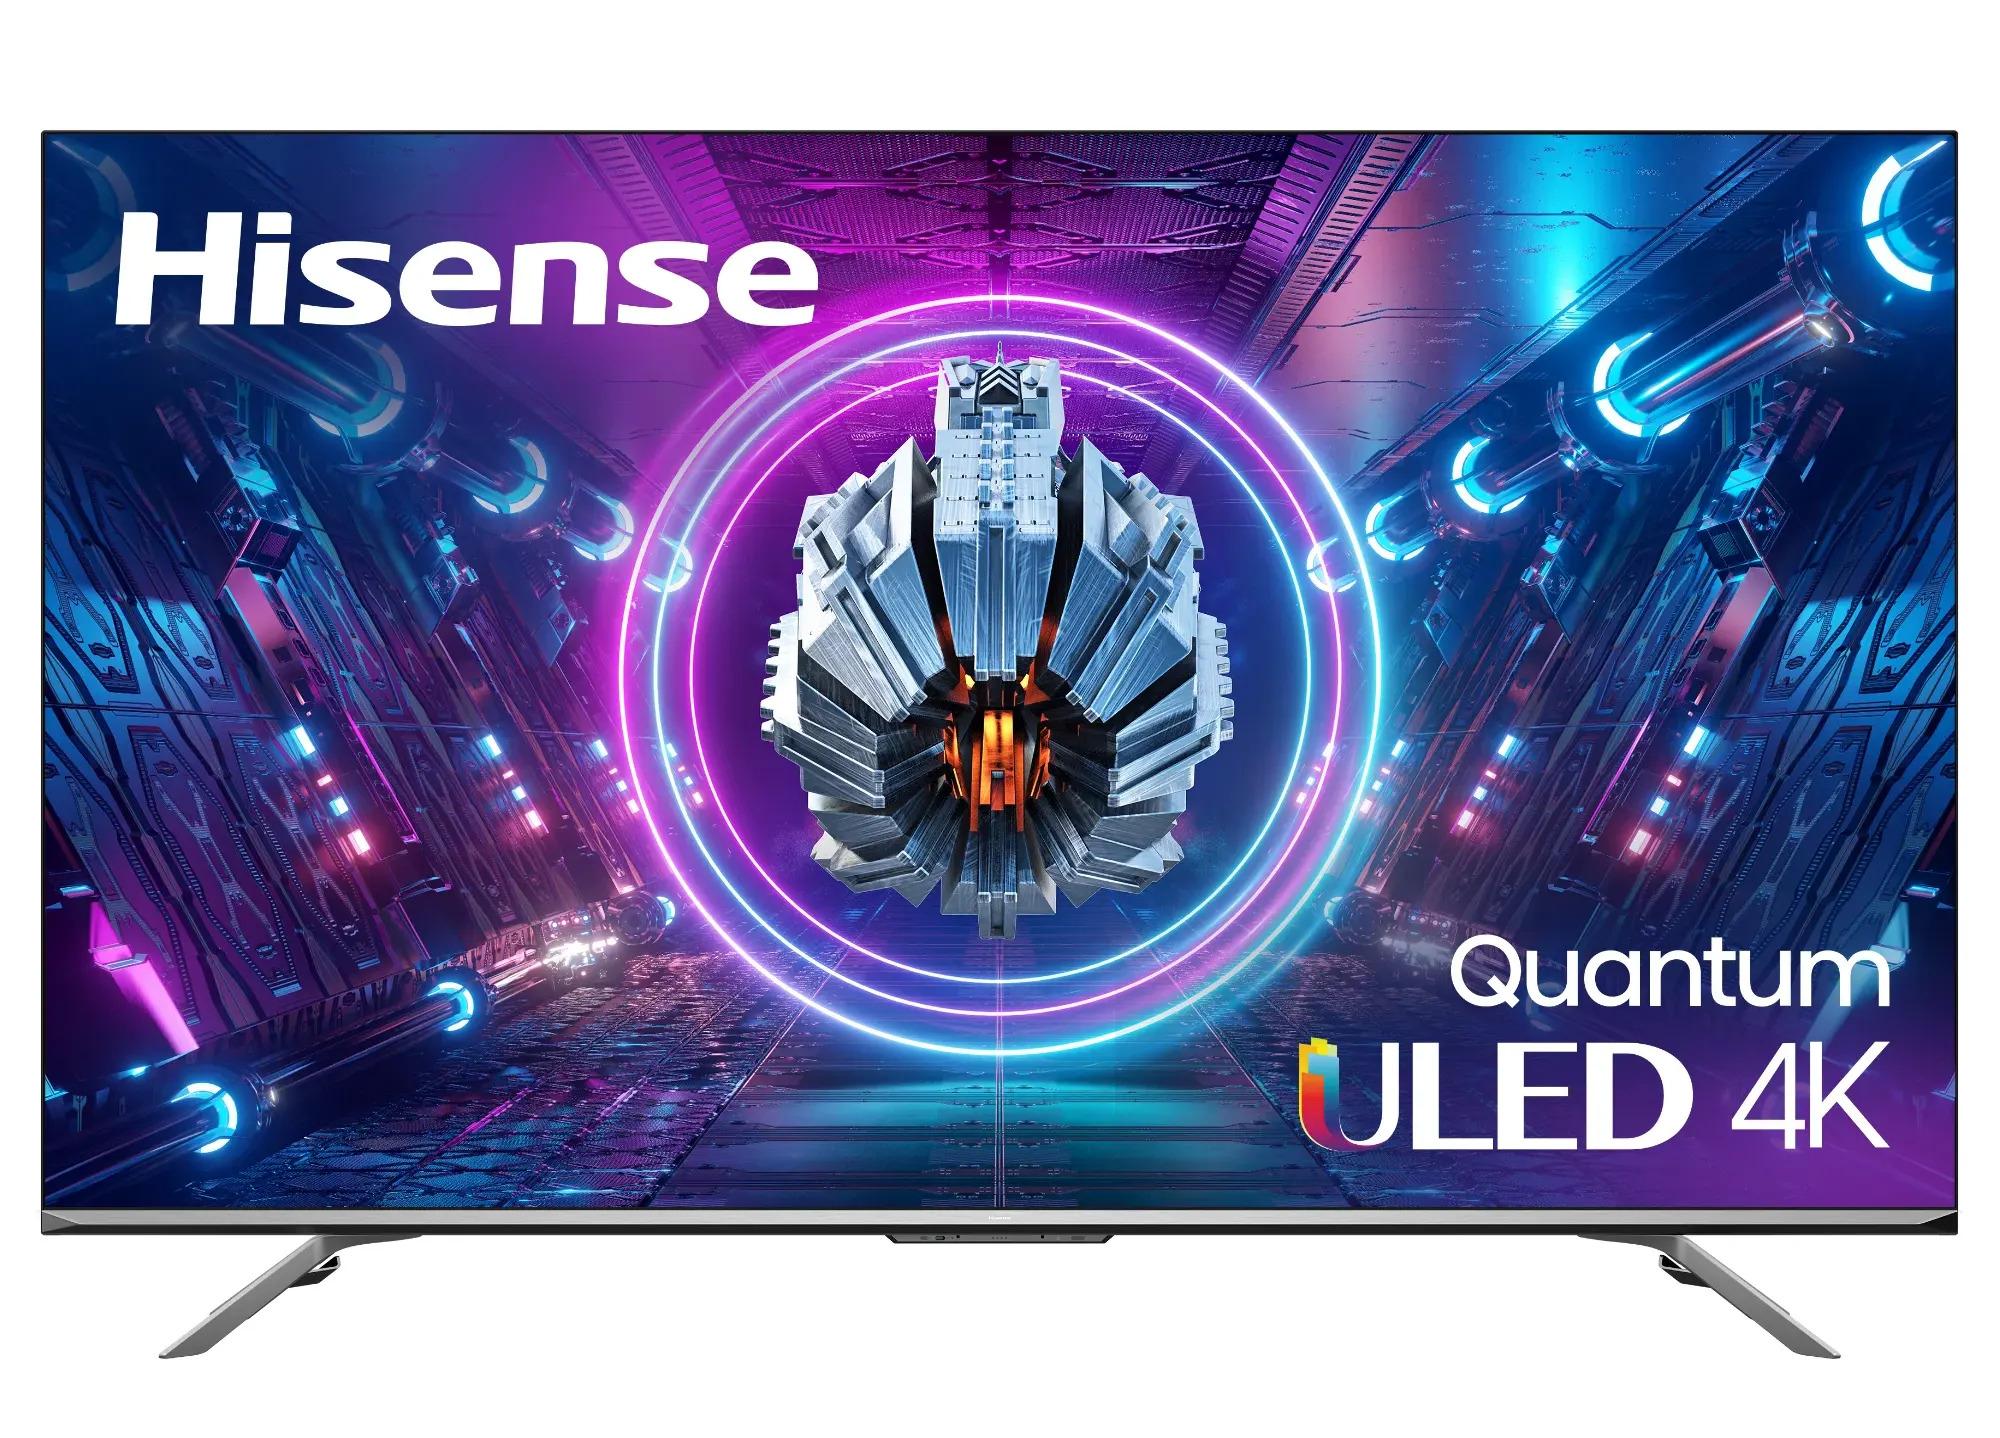 55in Hisense U7G Series Quantum ULED 4K Android TV for $278 Shipped